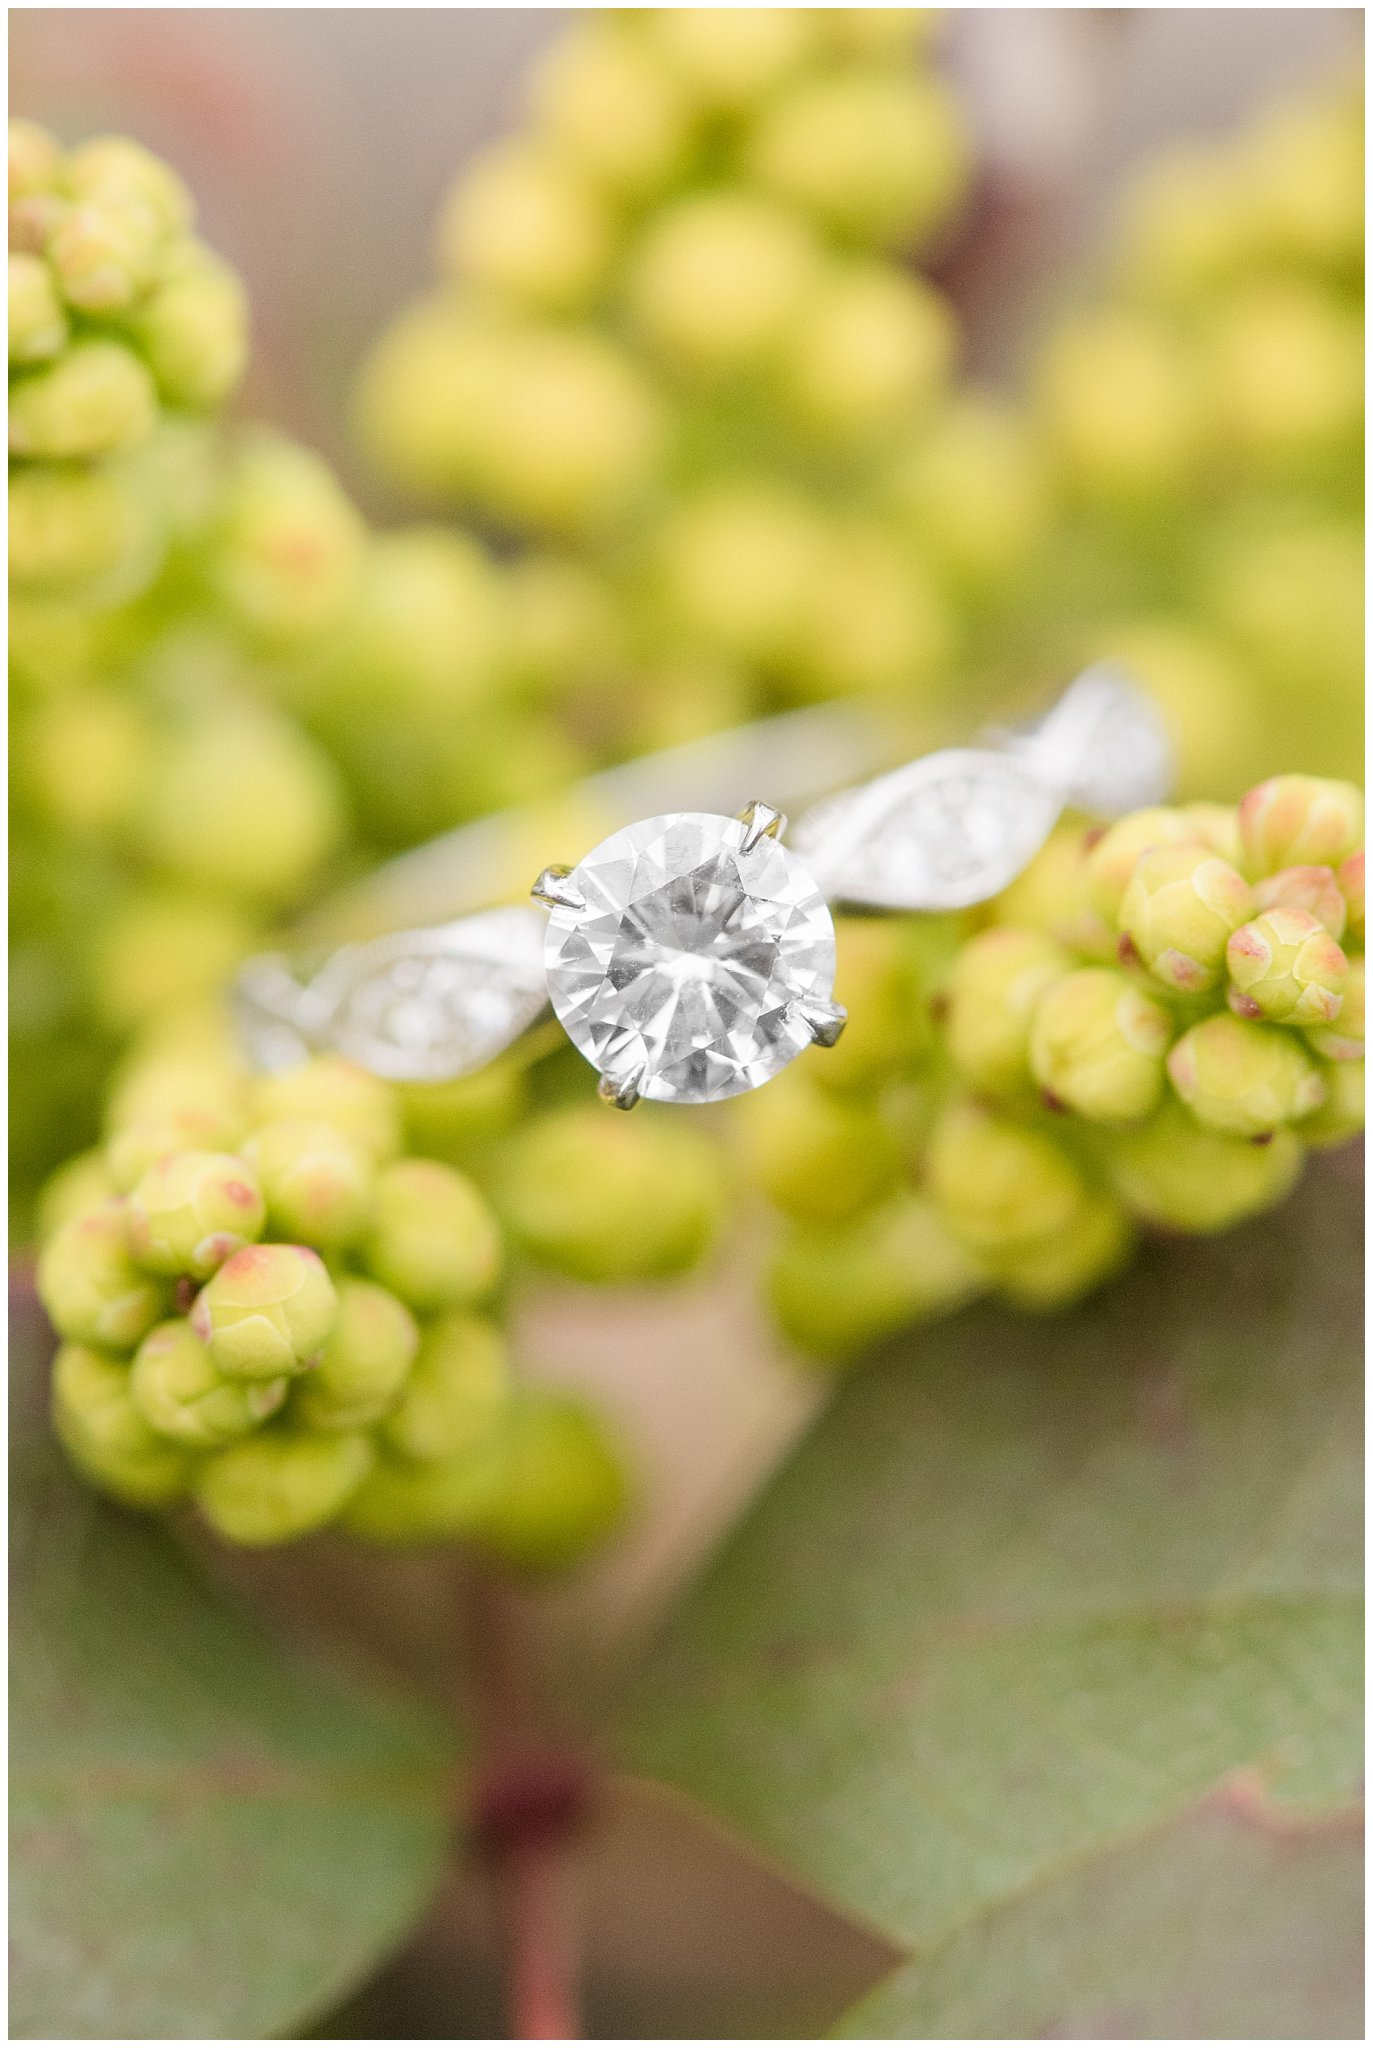 Engagement ring shot on green yellow berries | Downtown Salt Lake and Ensign Peak Engagement | Utah Wedding Photographers | Jessie and Dallin Photography